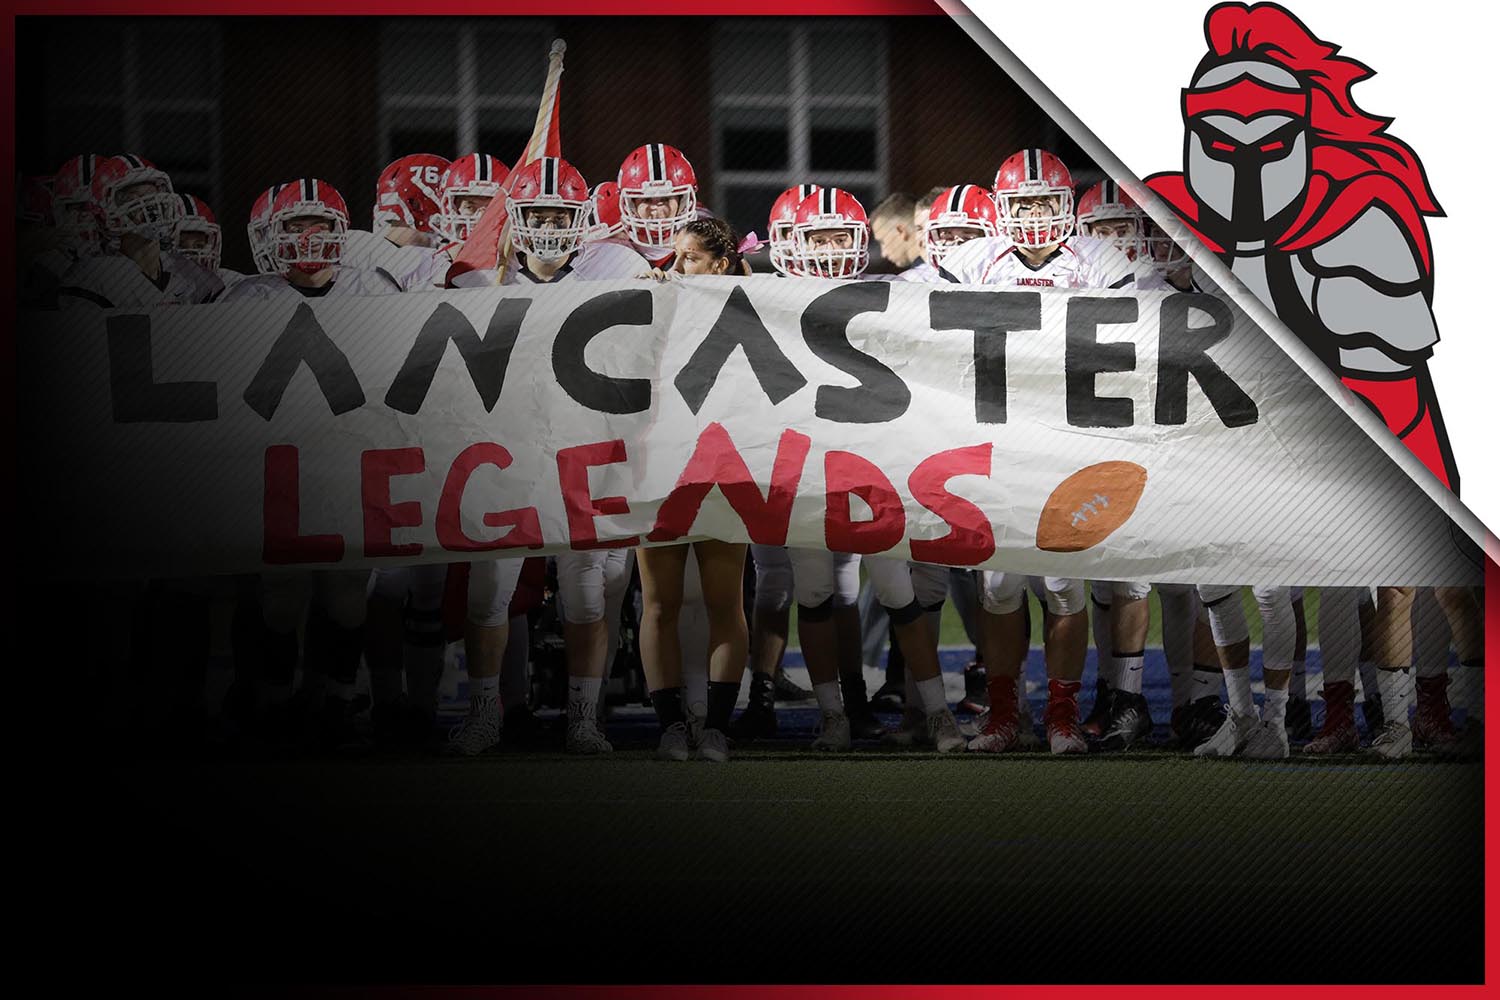 Check out Past Lancaster Football Games!